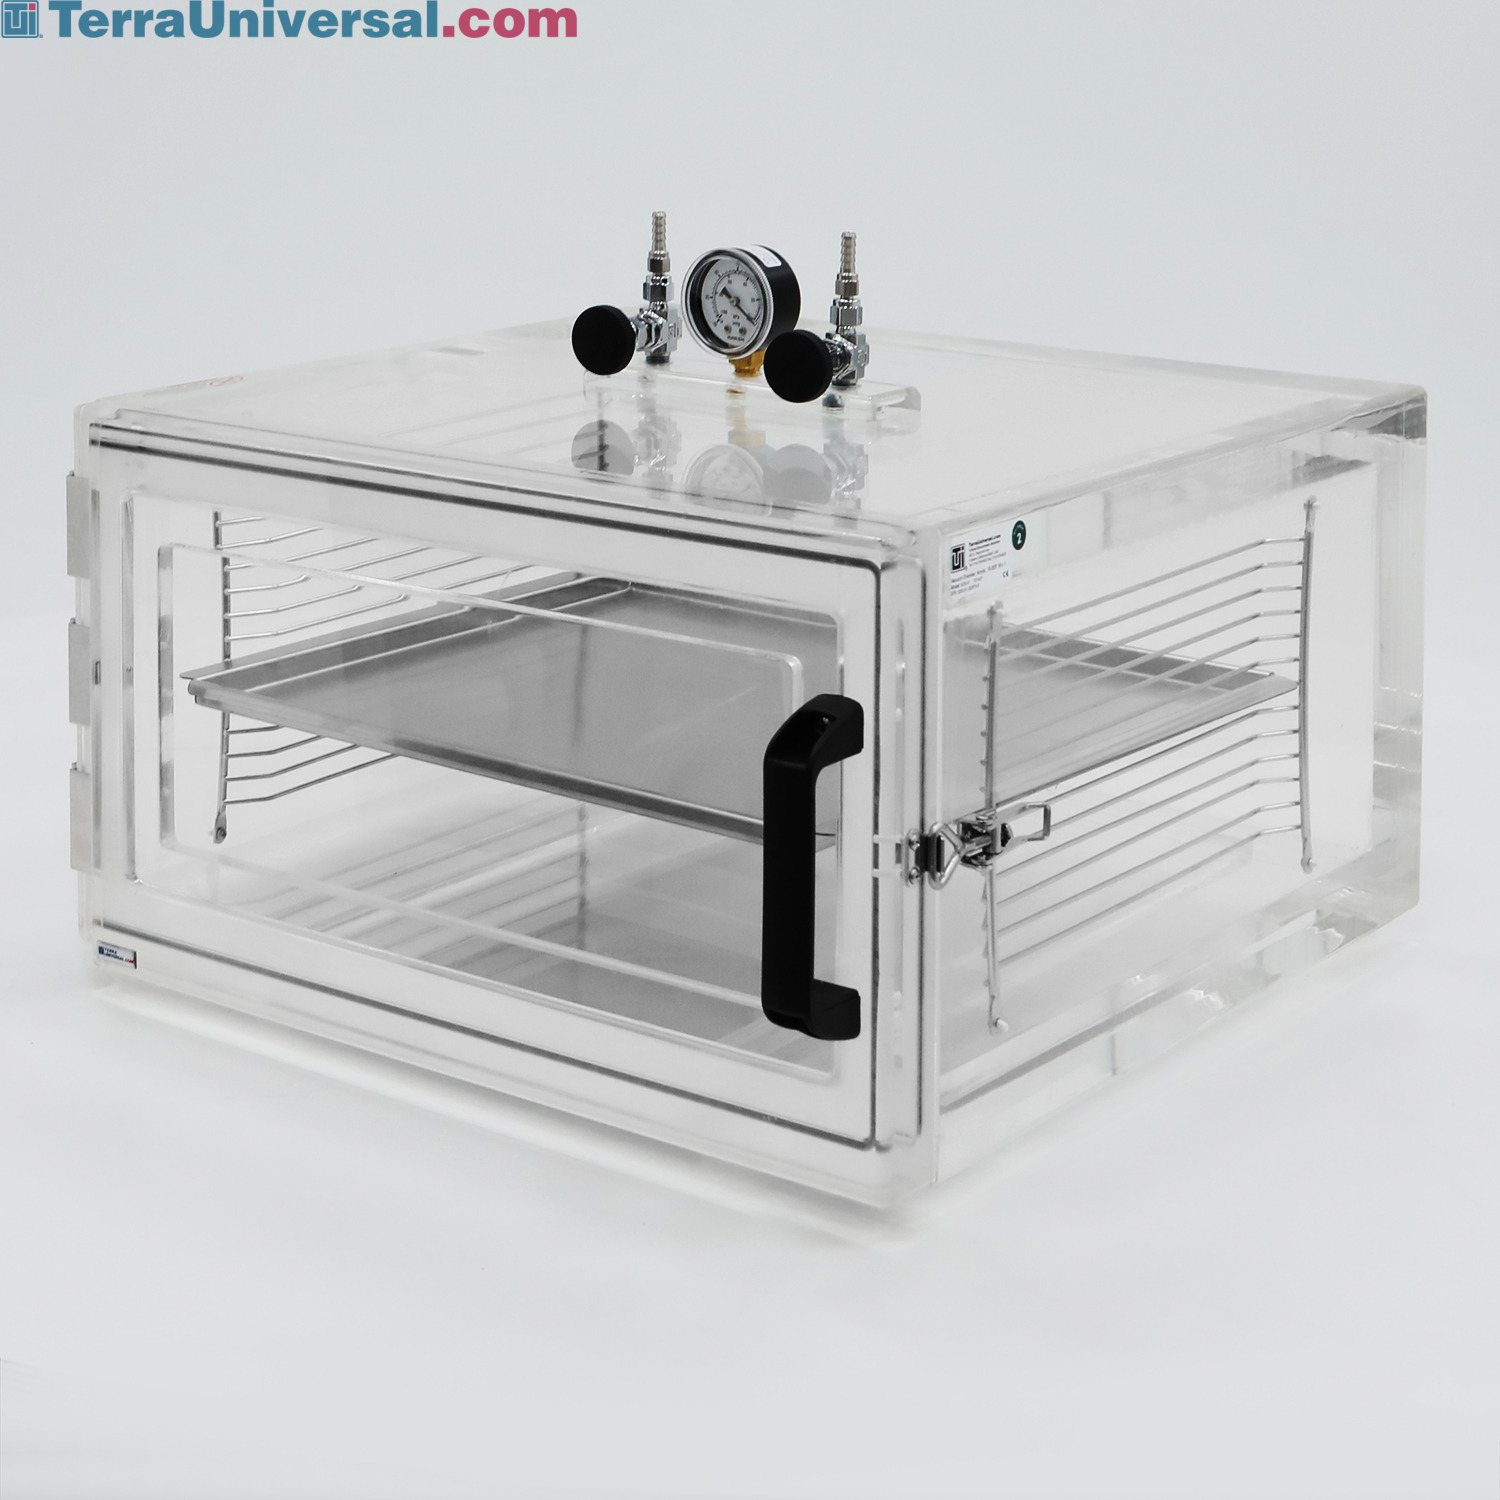 Desiccator Cabinet, Clear Acrylic, 3 Door Dry Box, 12W, 12D, 36H